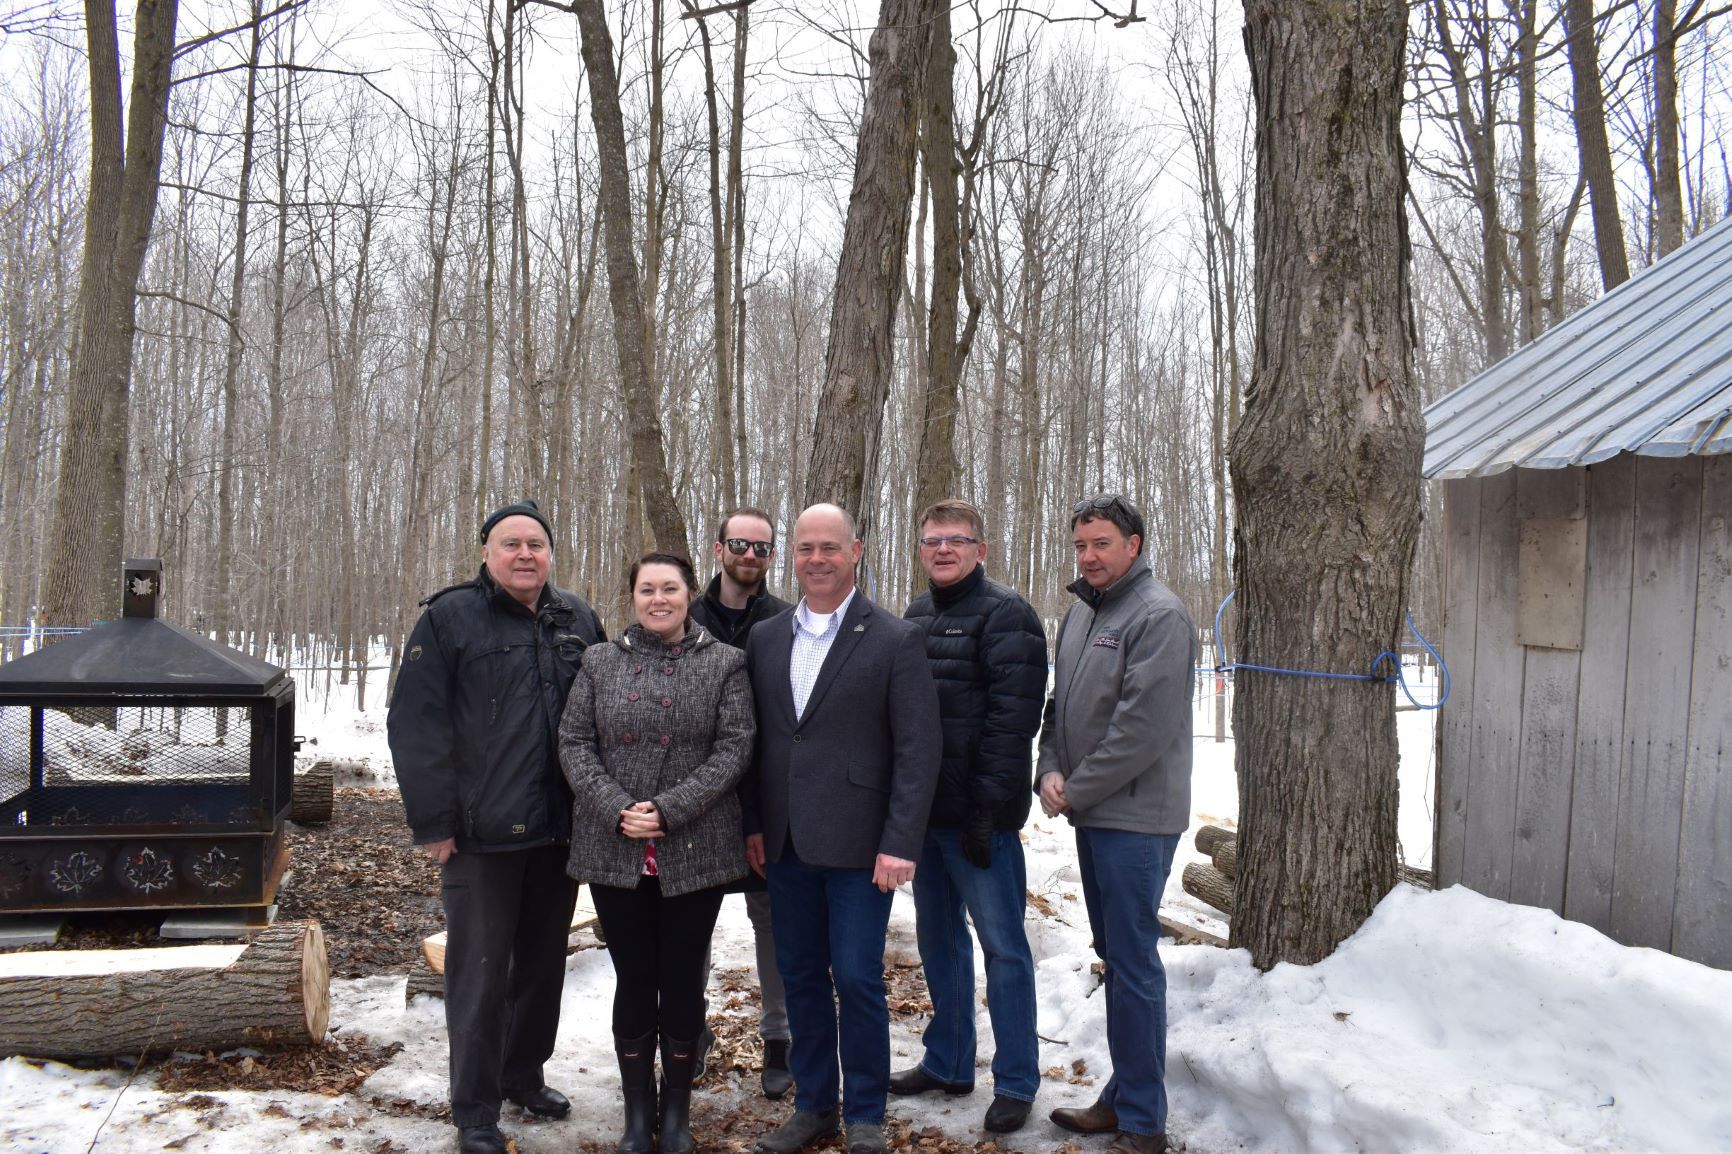 SNC relaunches popular maple syrup program at new community forest